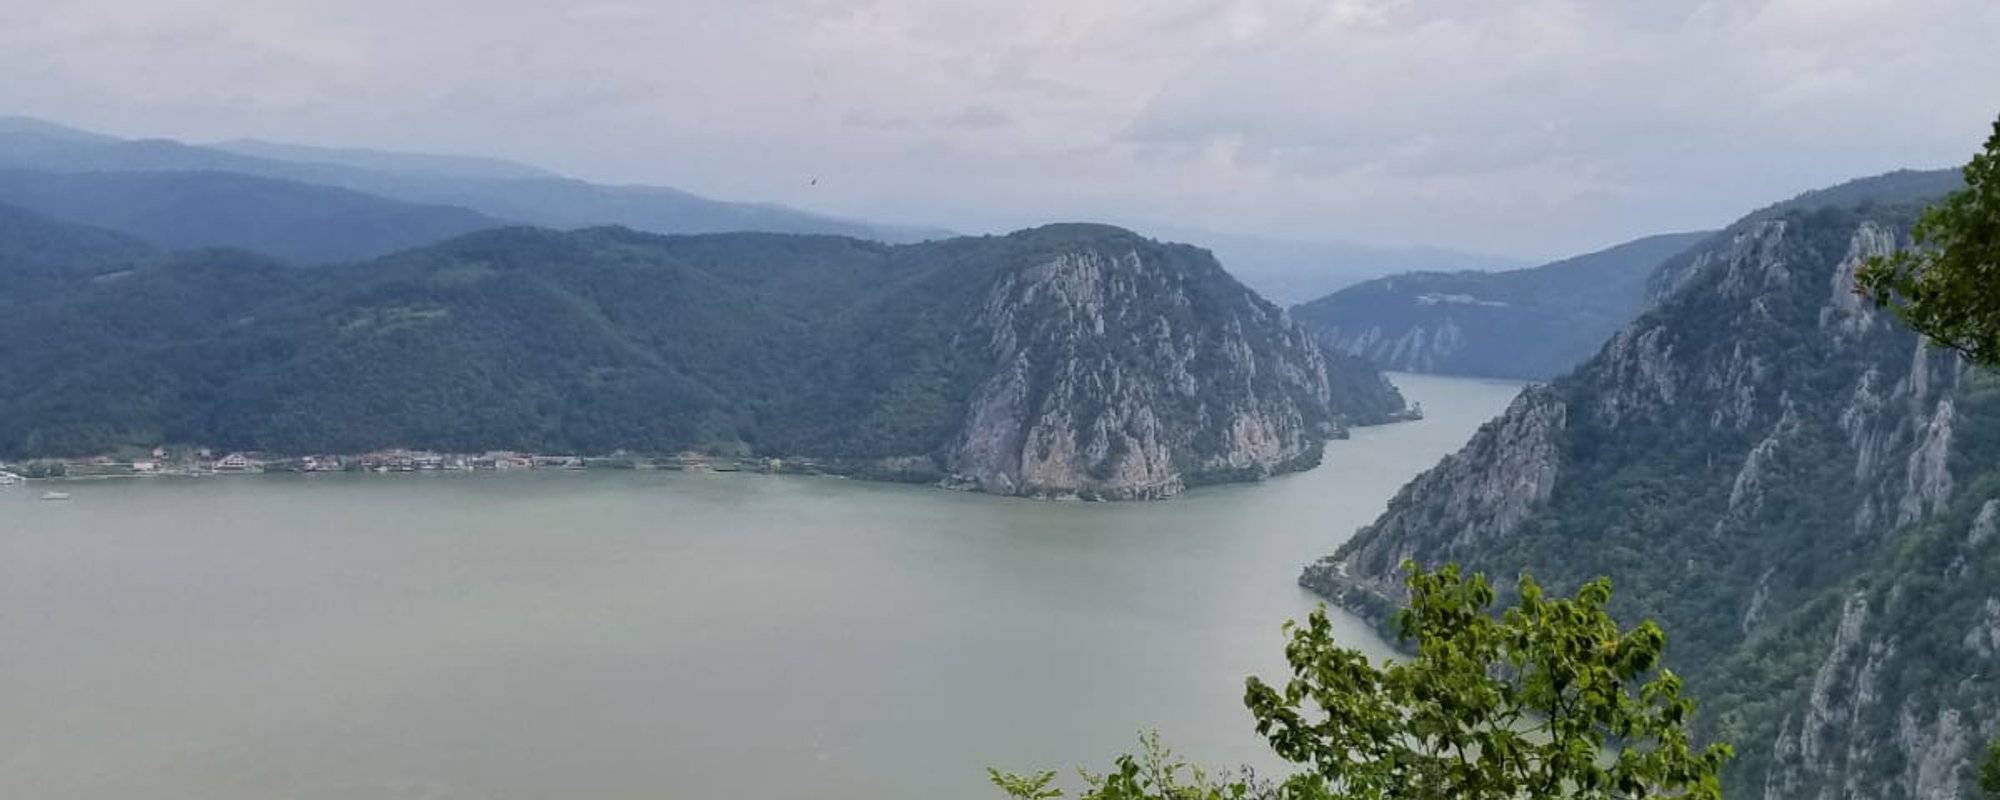 Hiking at Danube's Gorges in Romania